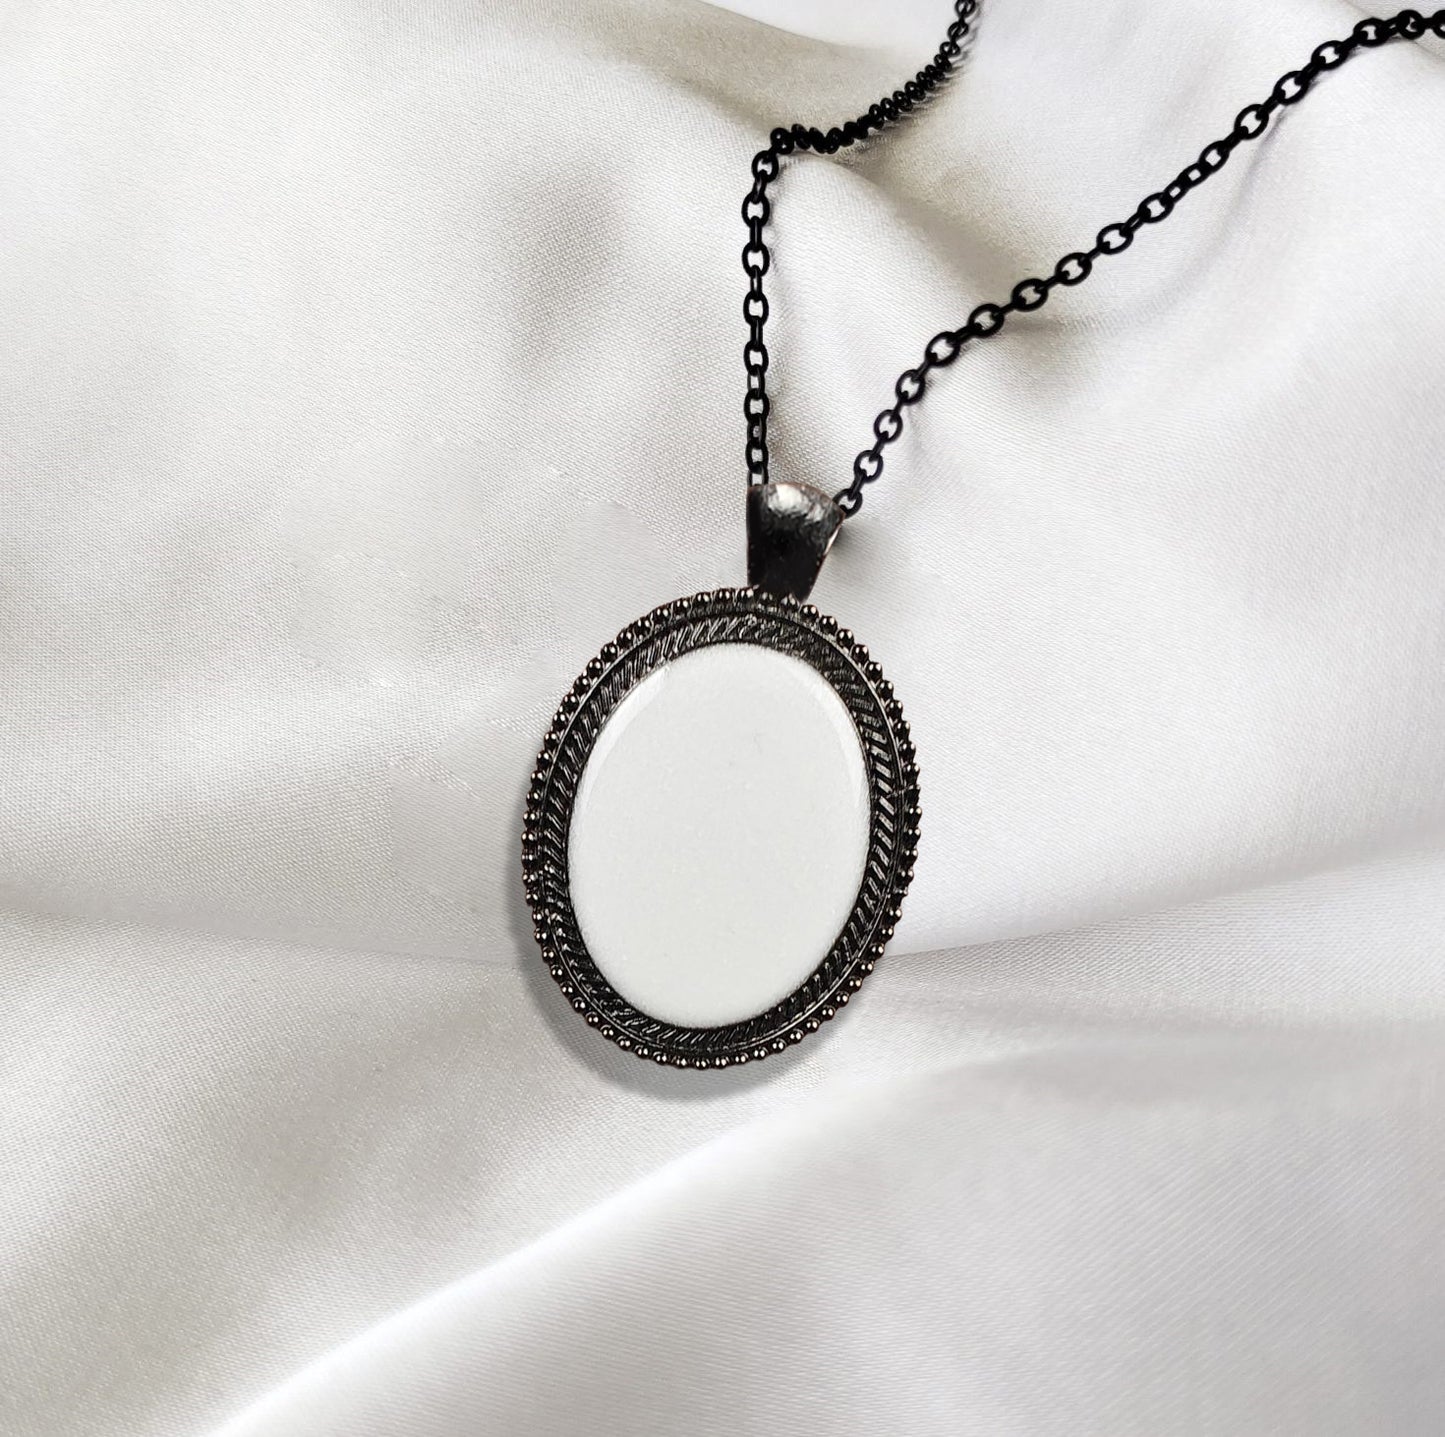 Black Broad Oval Pendant with Breastmilk Jewelry Kit